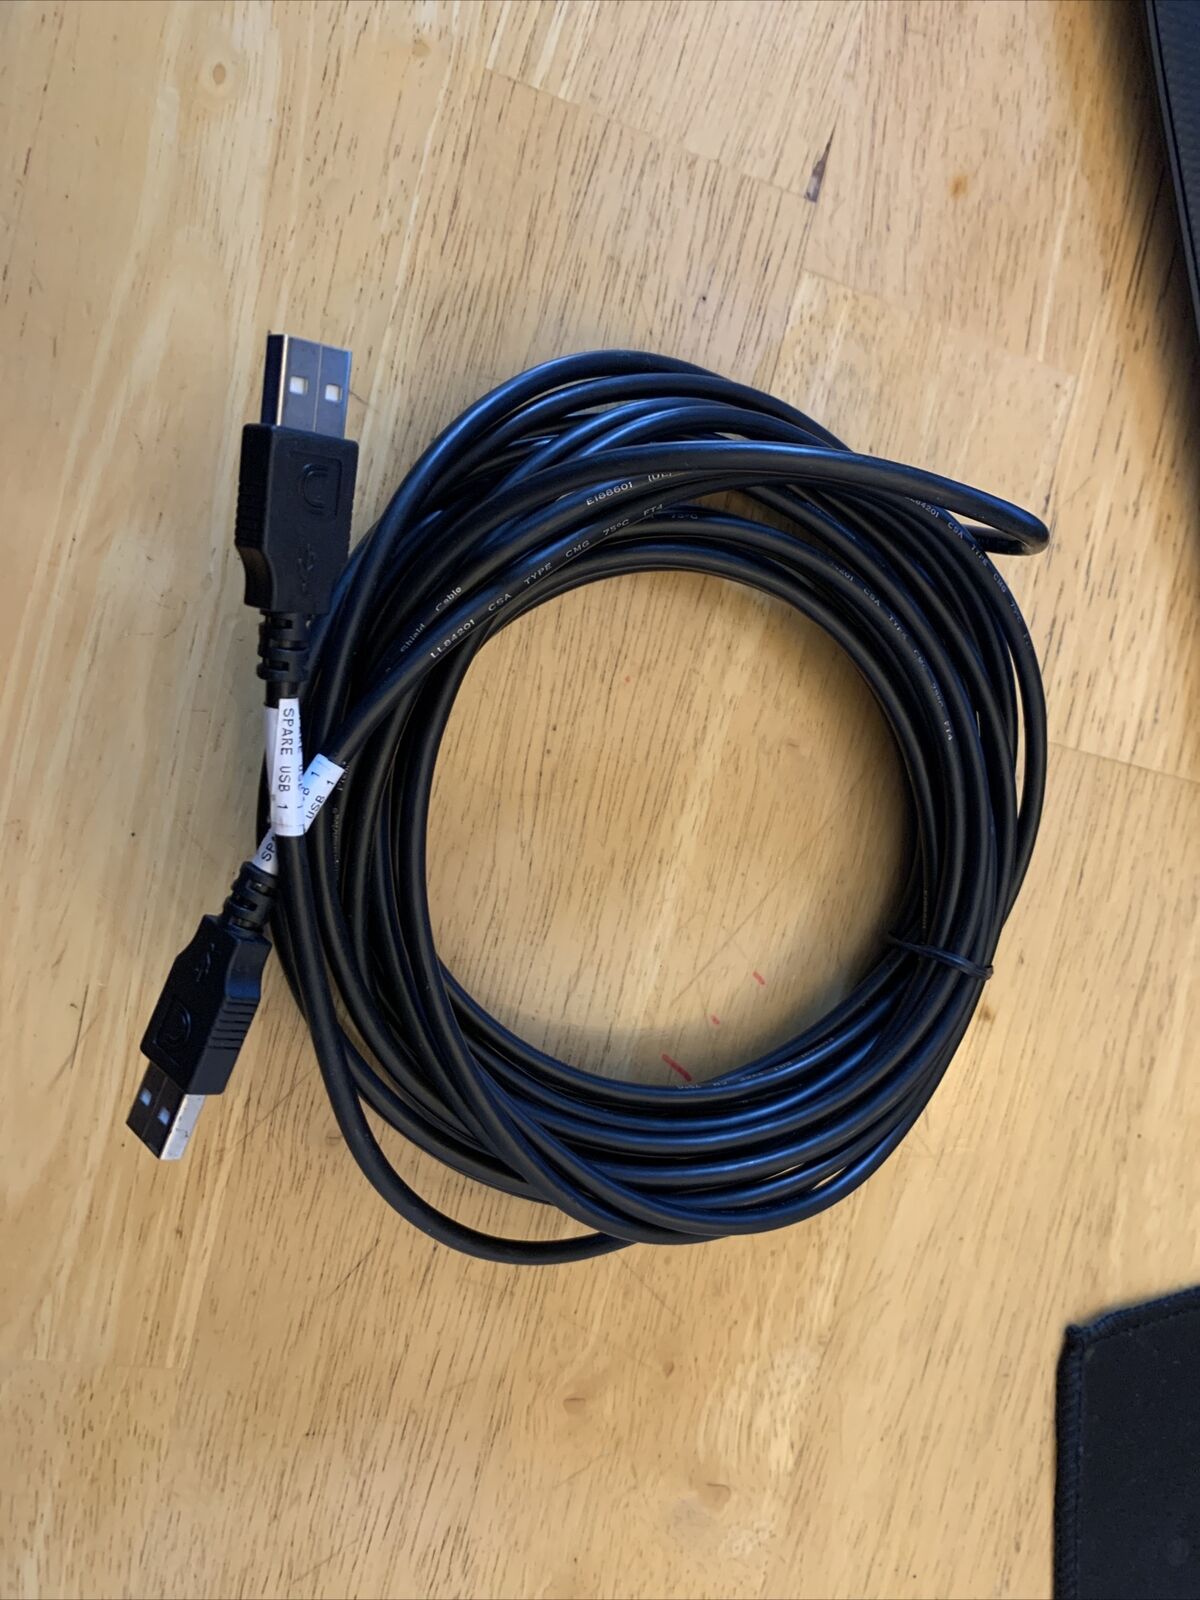 25’ Black USB Cable New Never Used